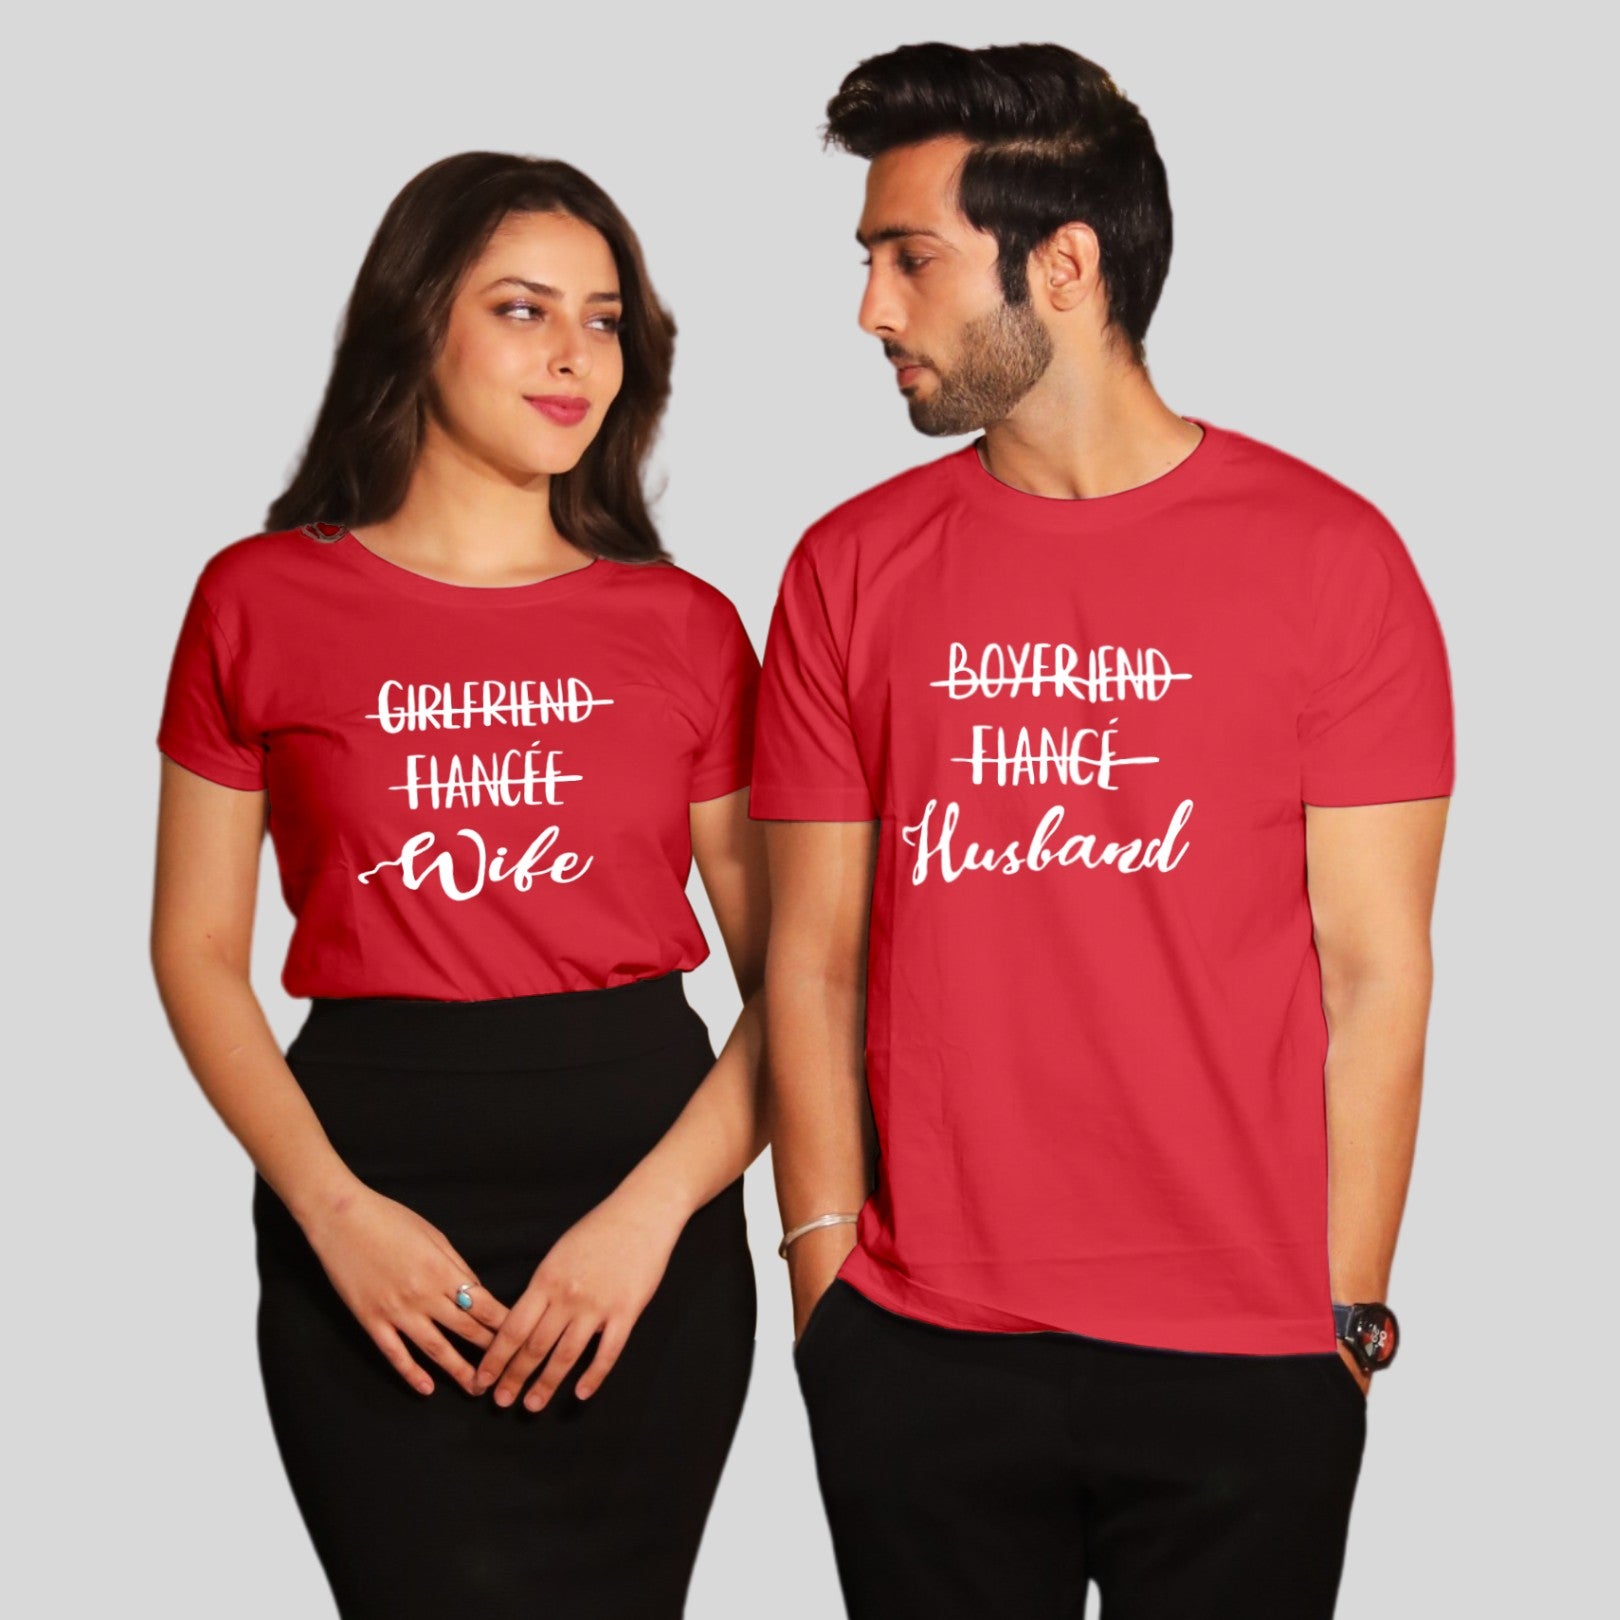 Couple T Shirt for Husband Wife In Red Colour - GF Fiance Wife BF Fiance Husband Variant